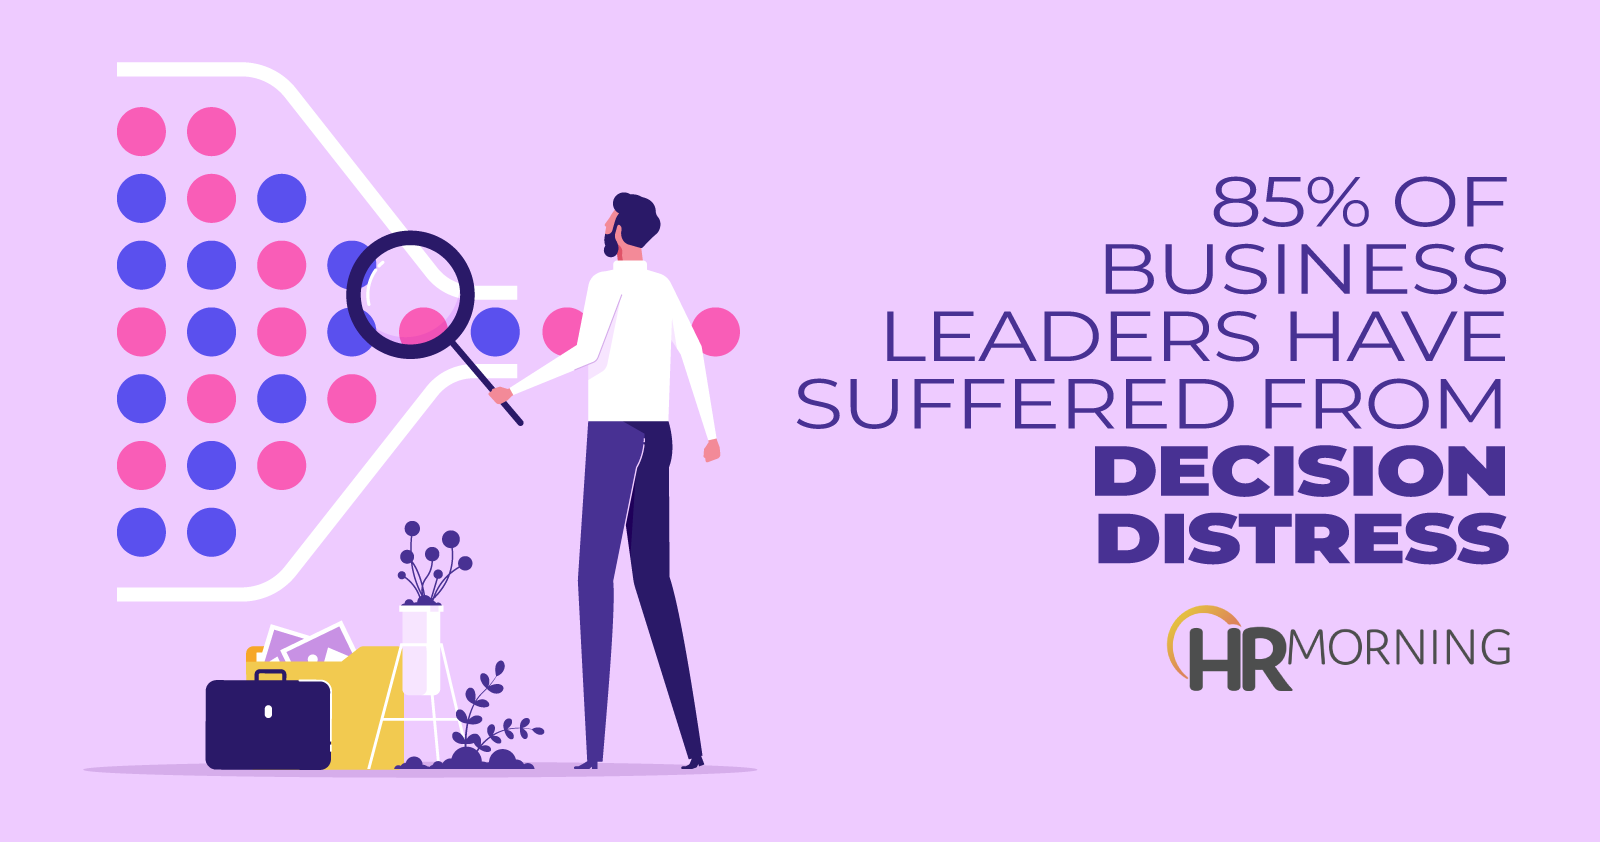 85% of business leaders have suffered from decision distress